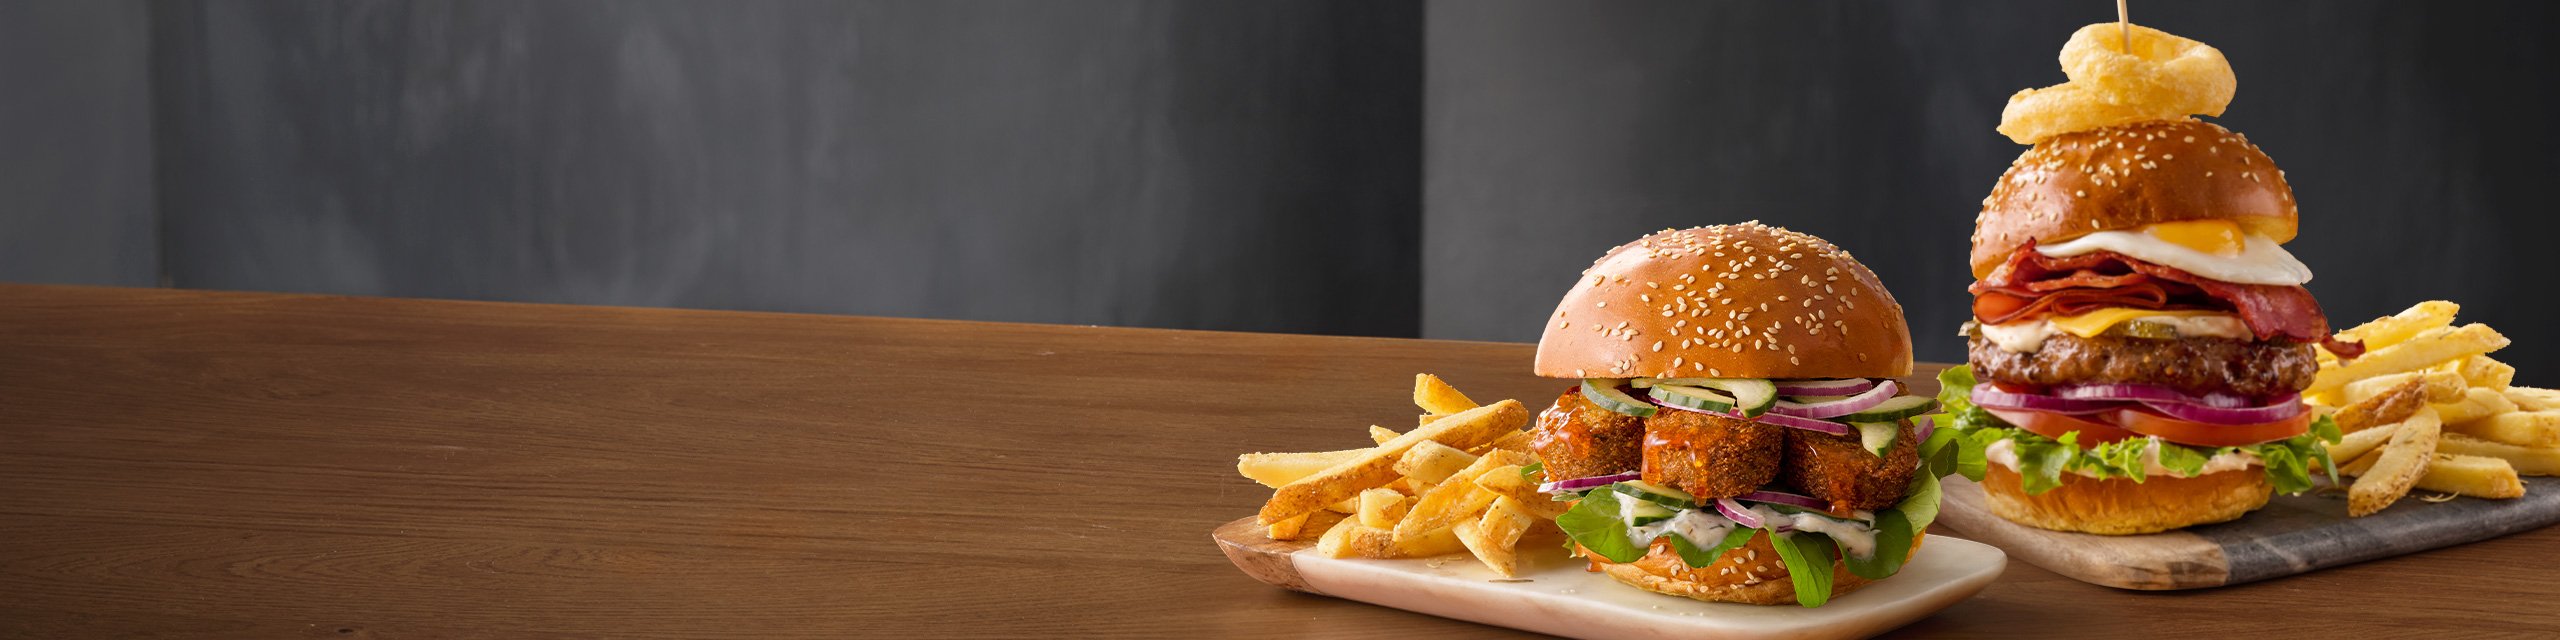 Mugg & Bean Gourmet Burgers – Big Daddy and Buttermilk Chicken with a portion of chips, on a wooden table